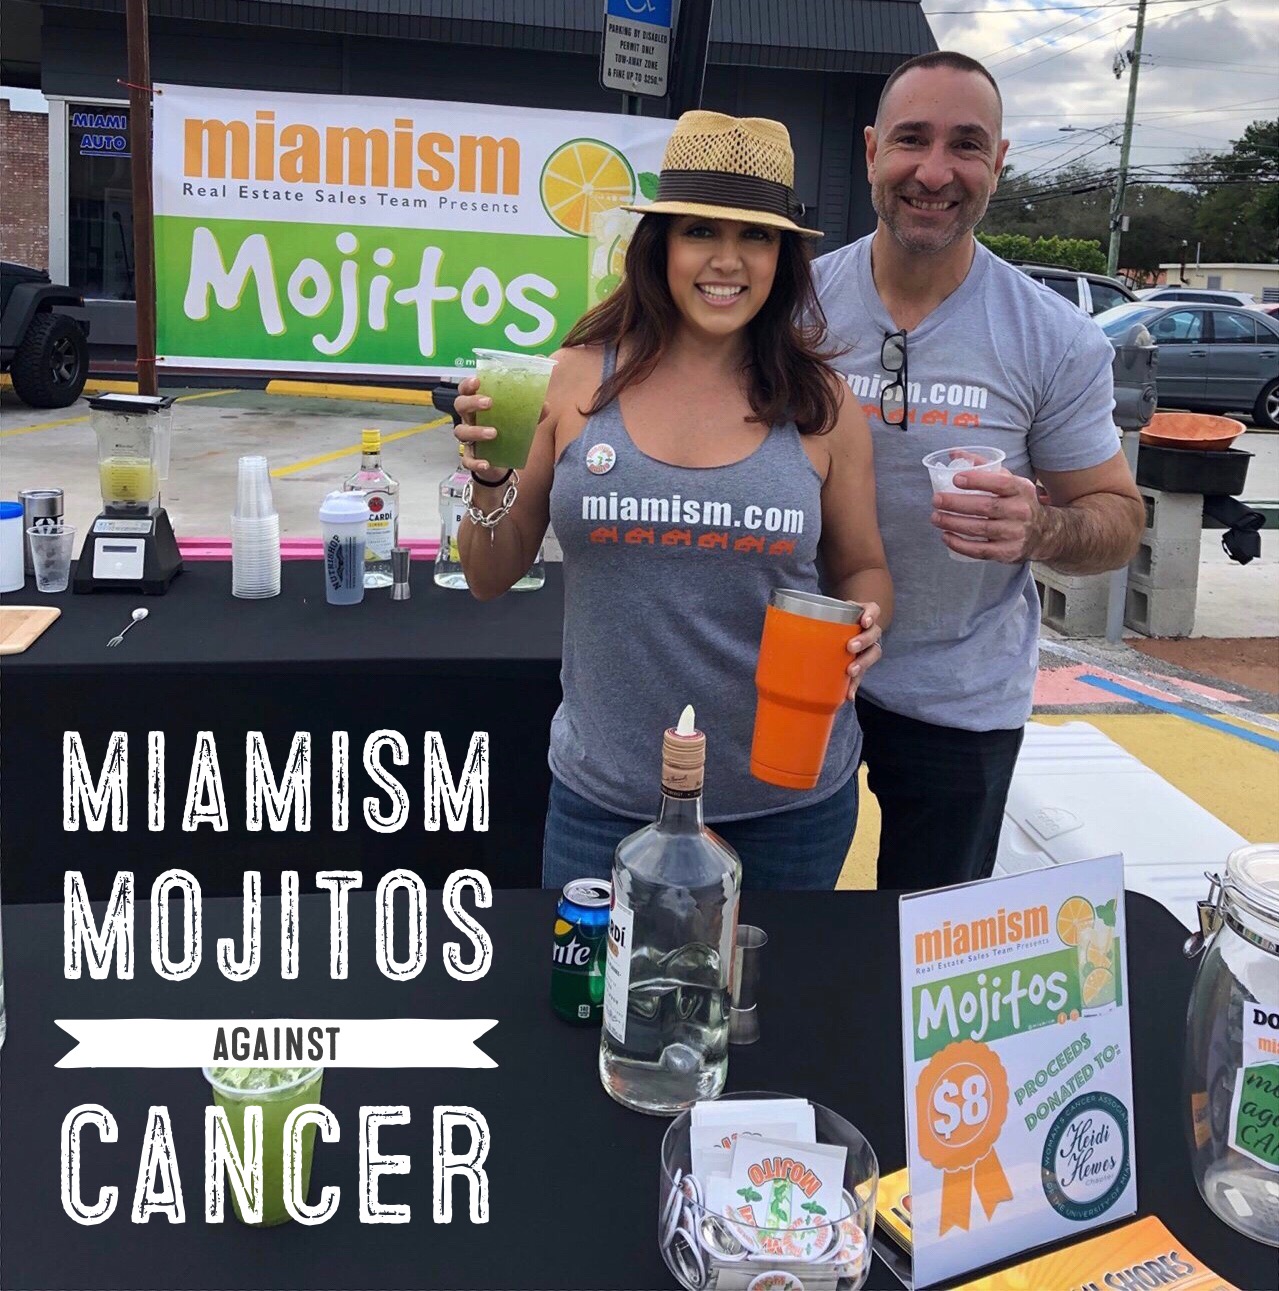 miamism-mojitos-against-cancer-plaza-98